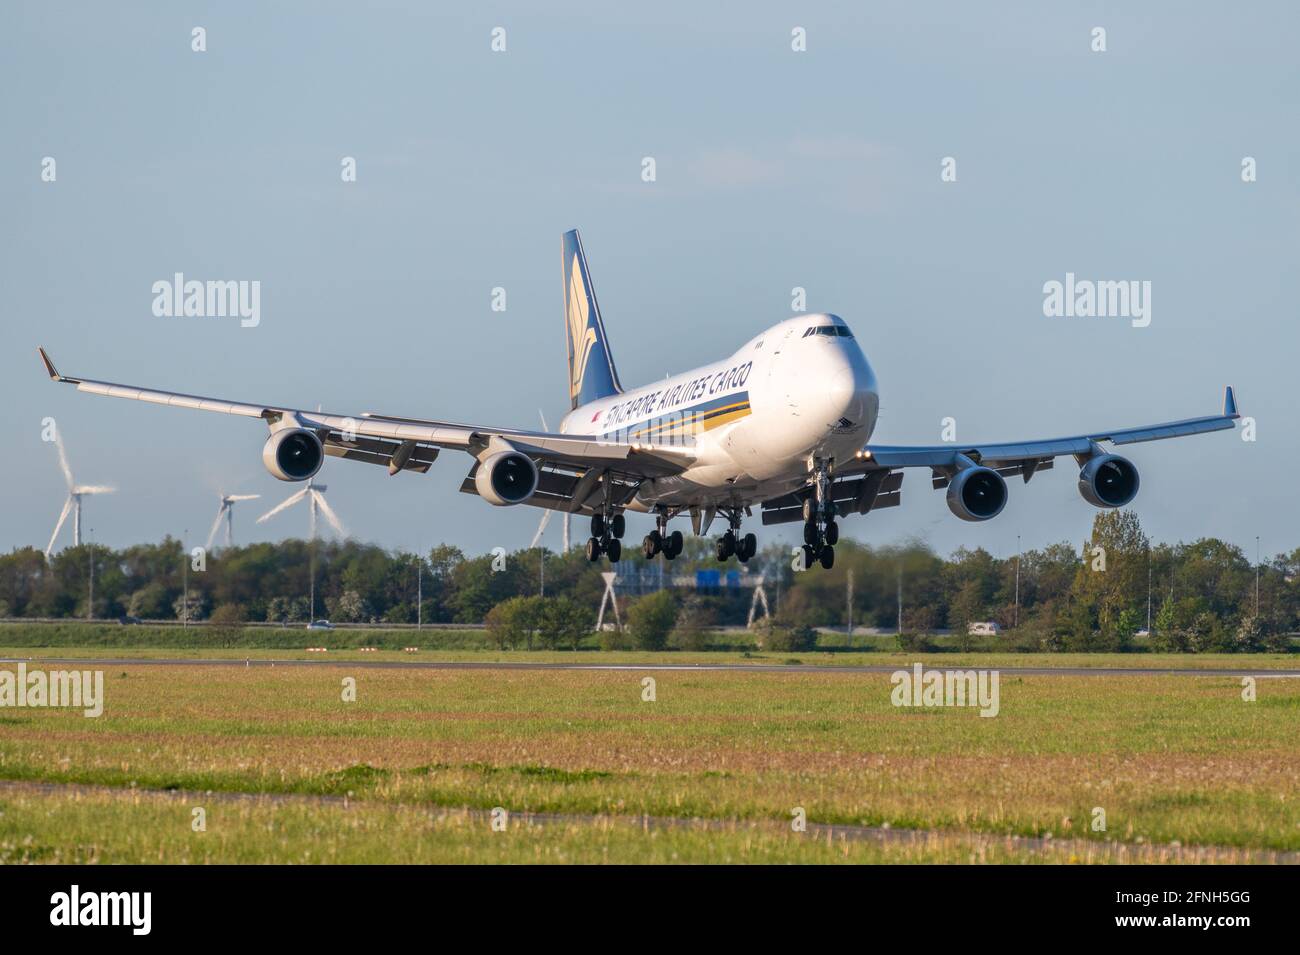 Singapore airlines Cargo Boeing 747 during landing phase Stock Photo